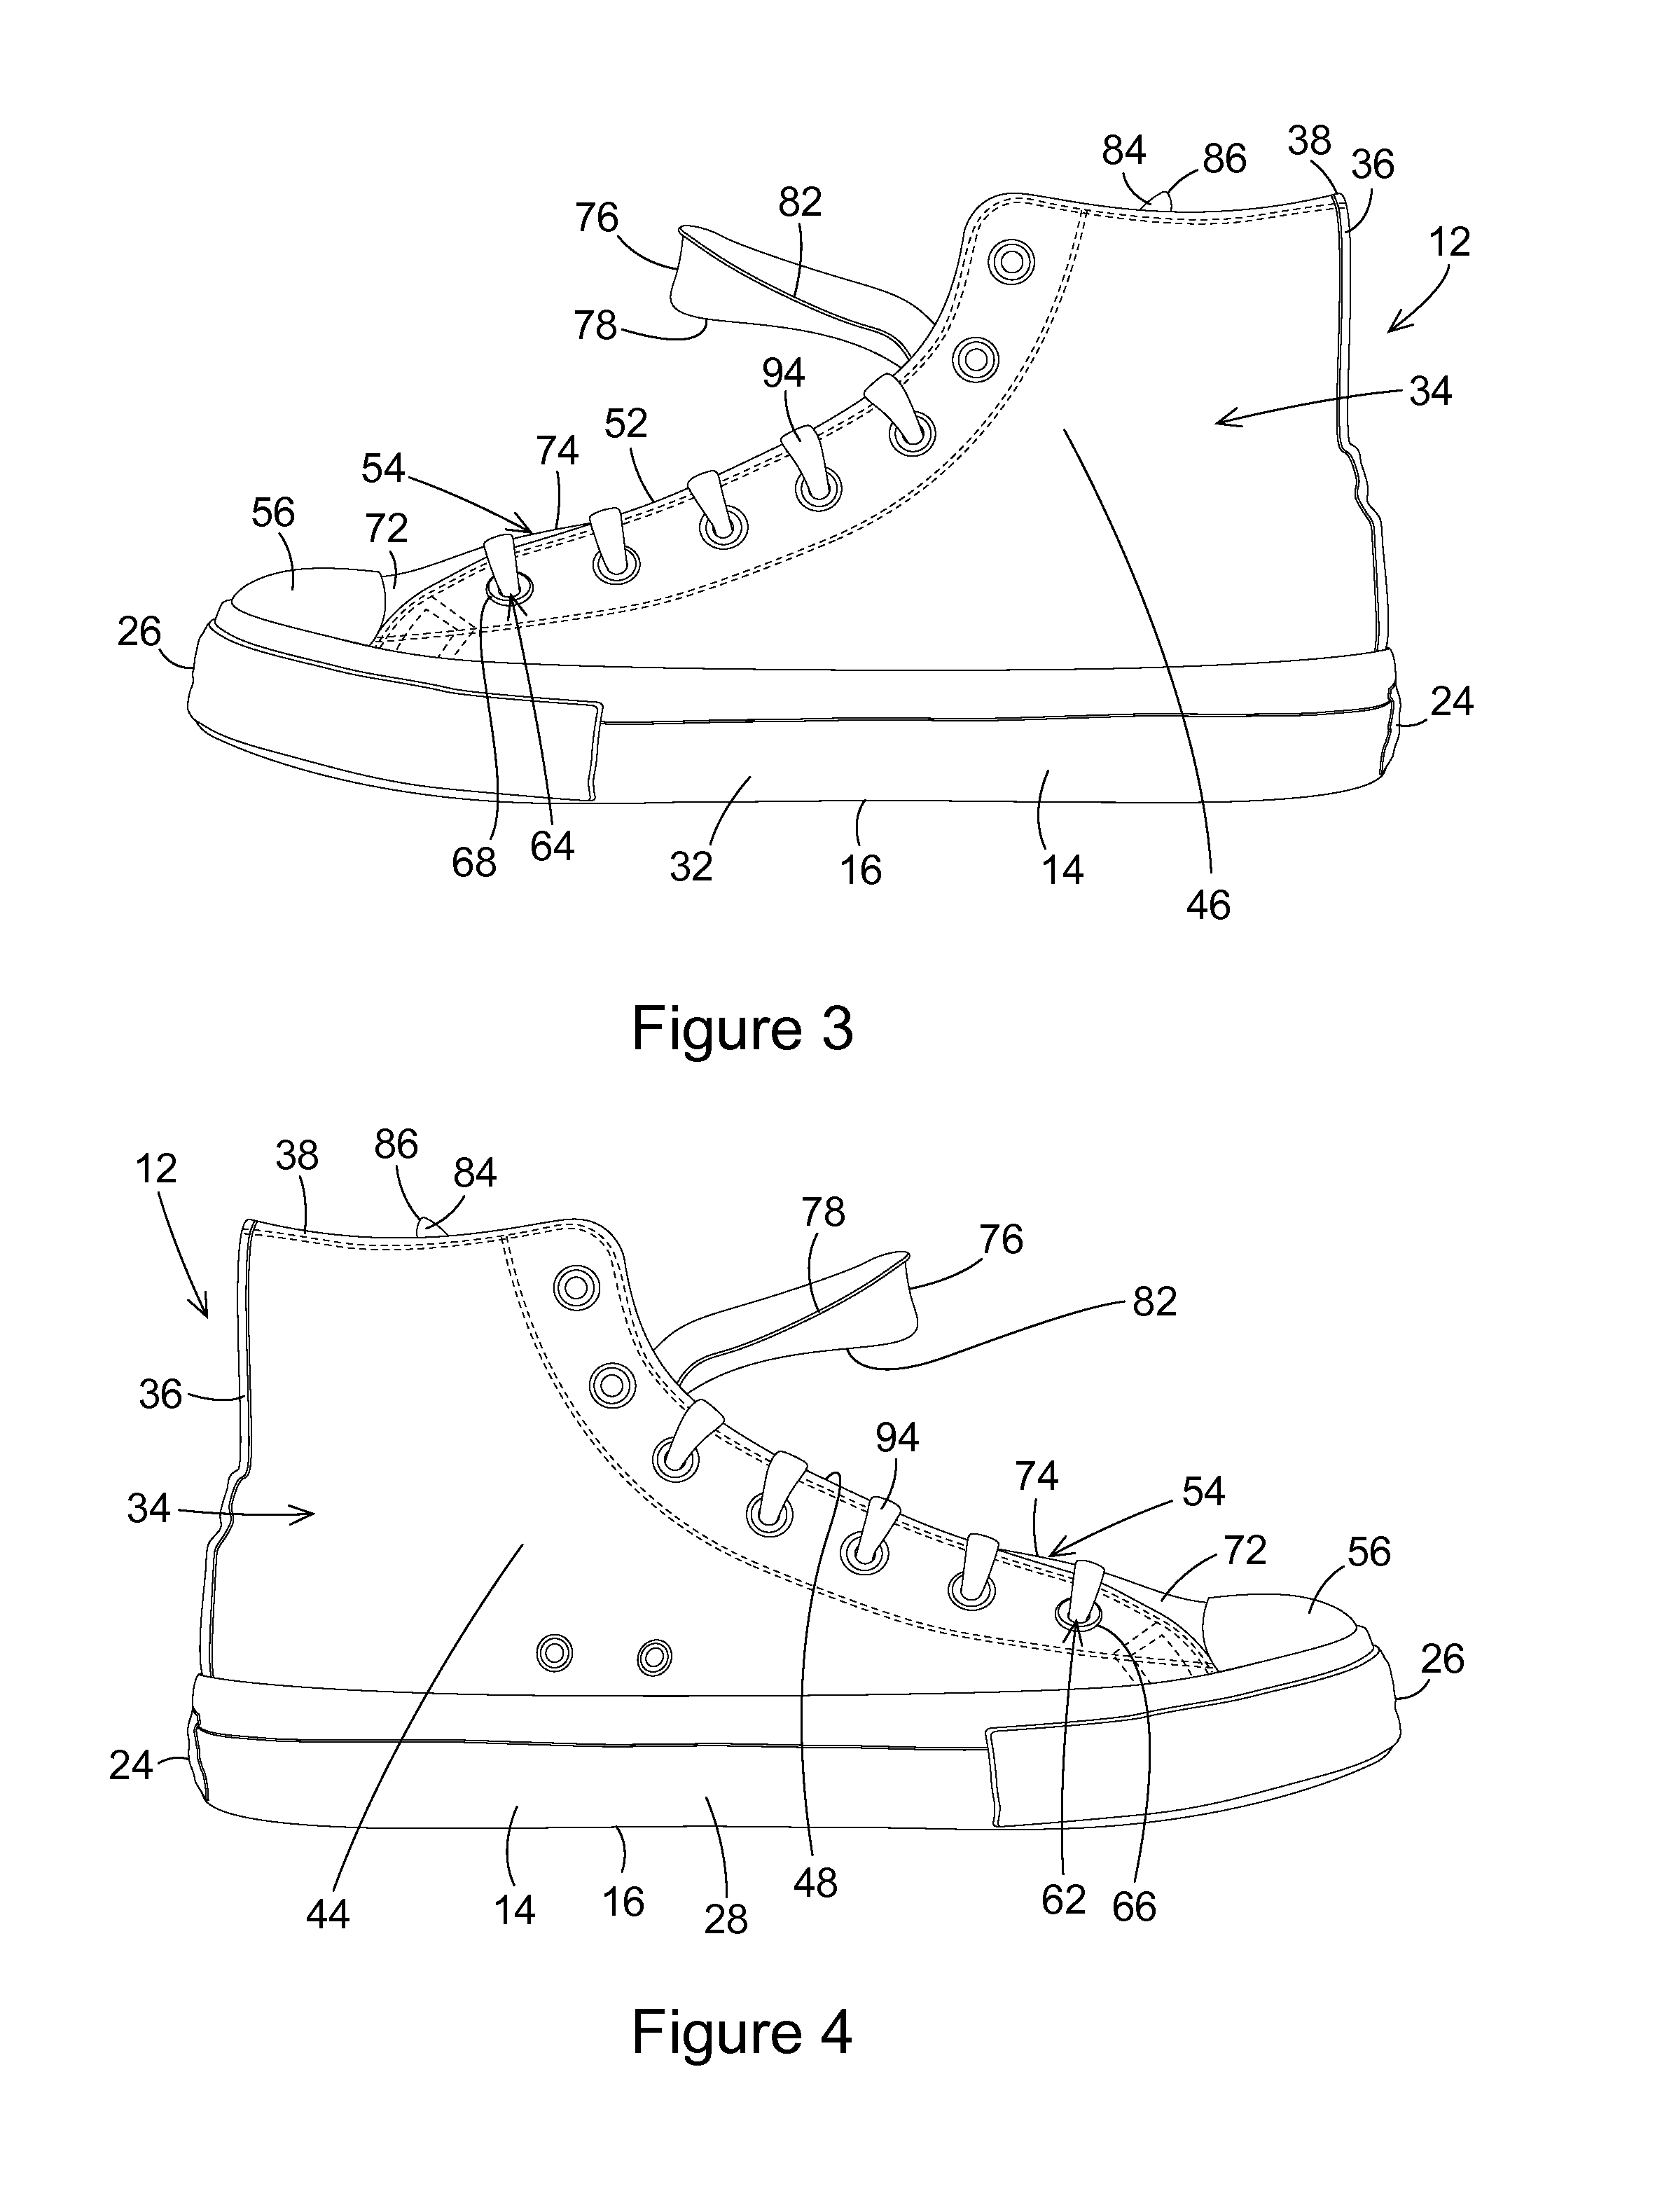 Shoe construction with double tongue